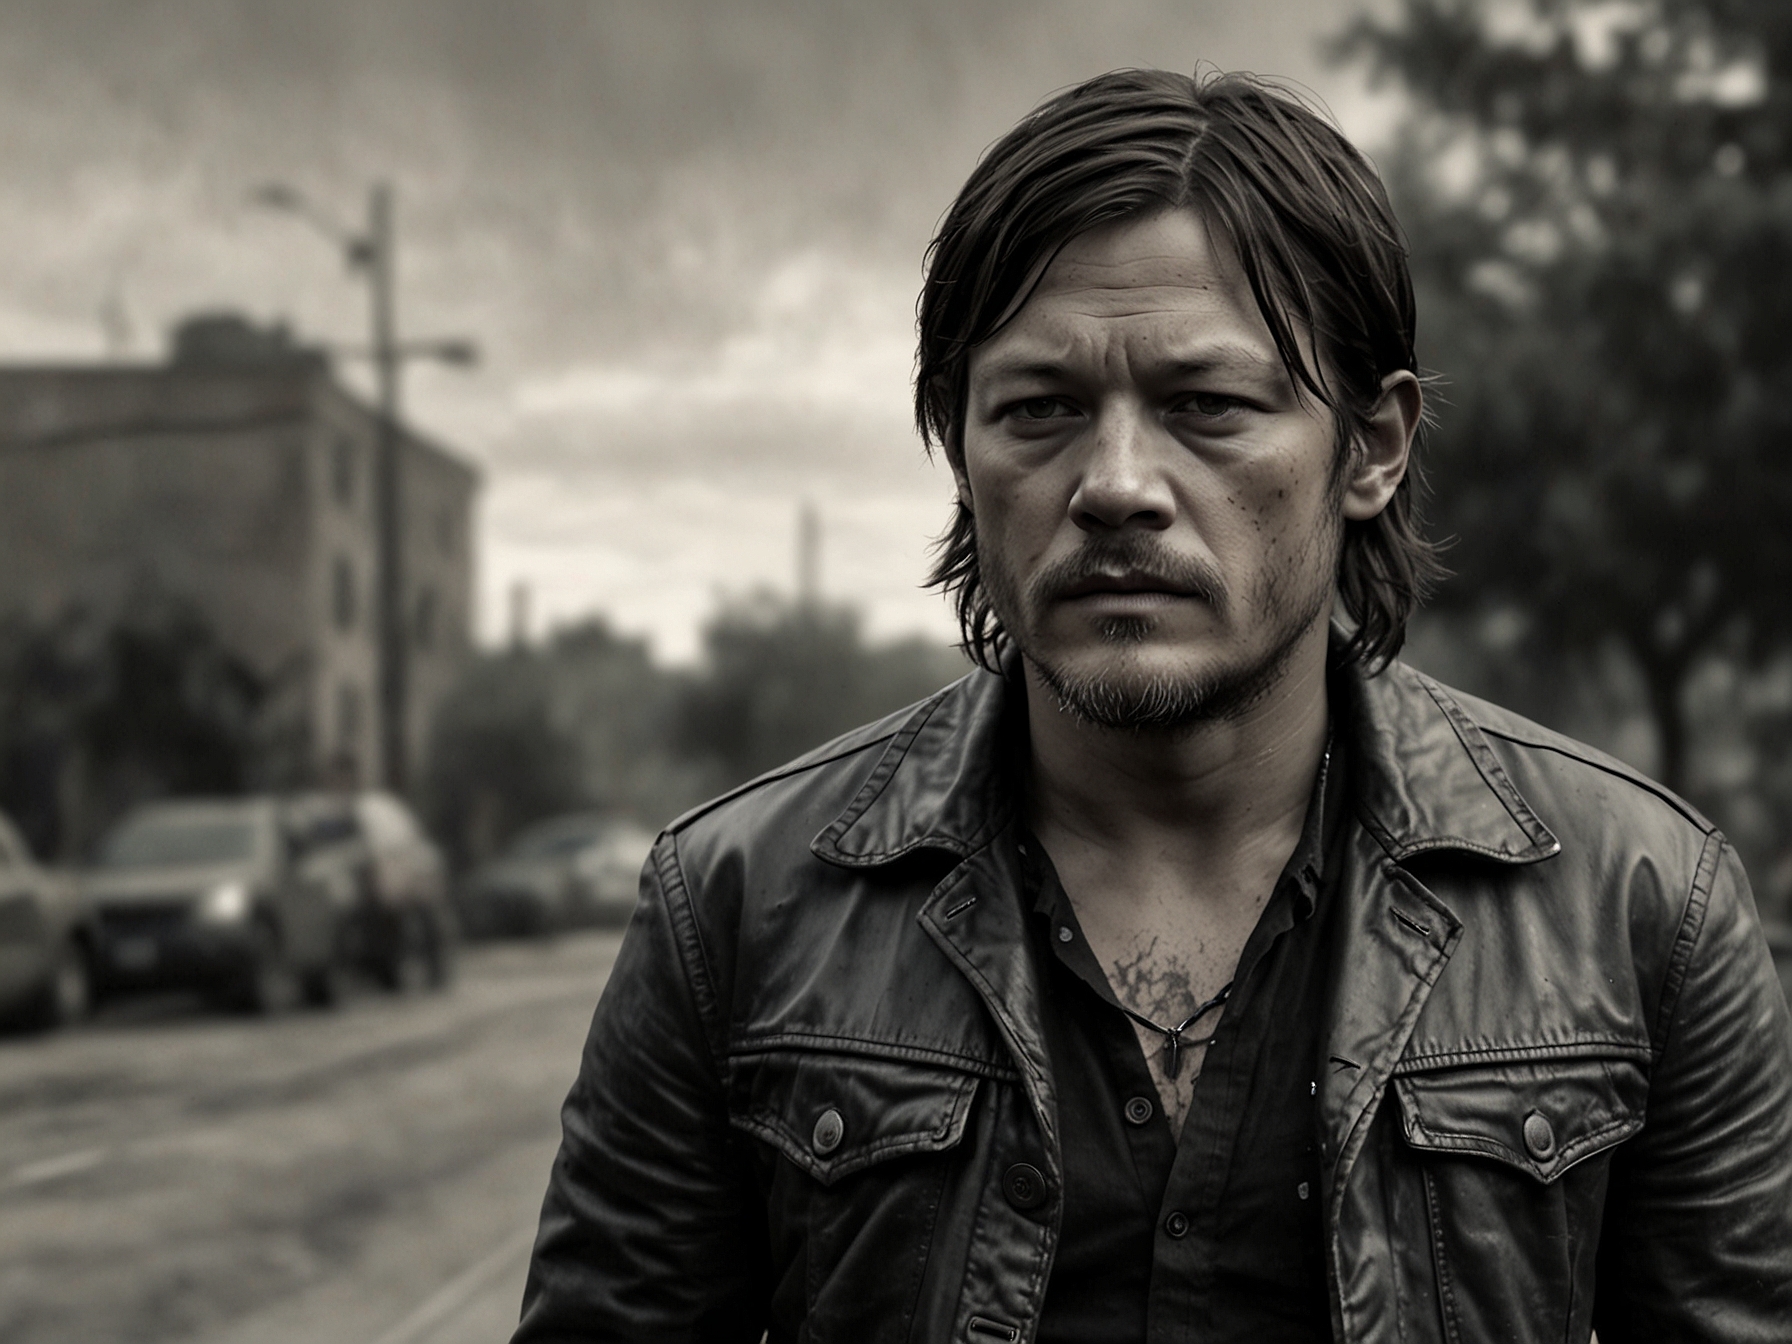 Norman Reedus as a rugged biker in 'The Bikeriders.' His look, influenced by his portrayal of Daryl Dixon in 'The Walking Dead,' features disheveled hair, dirty clothes, and a hardened stare.